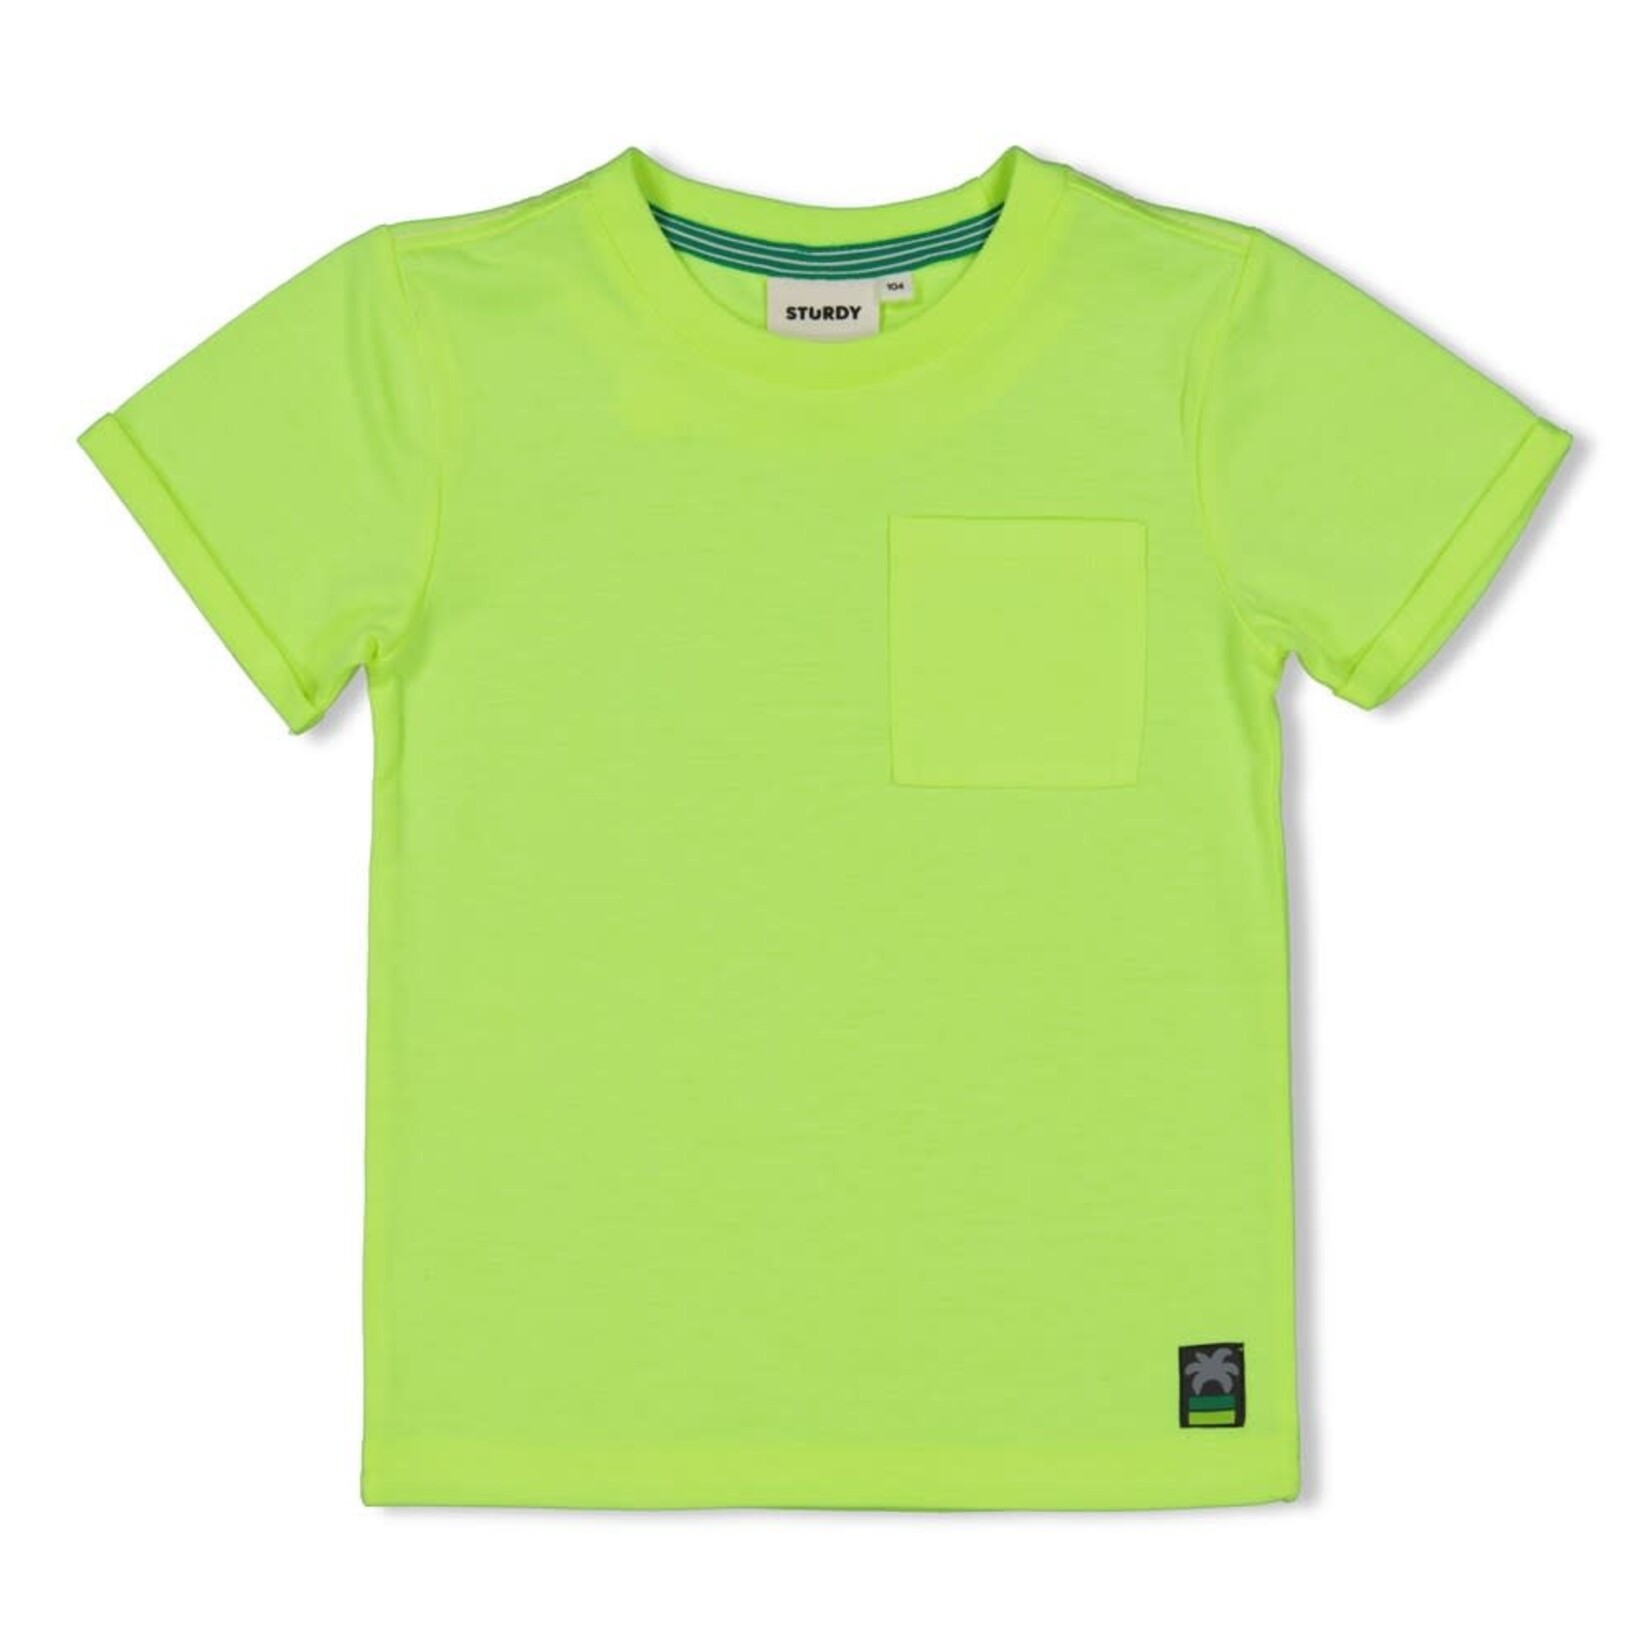 Sturdy T-shirt - Gone Surfing lime